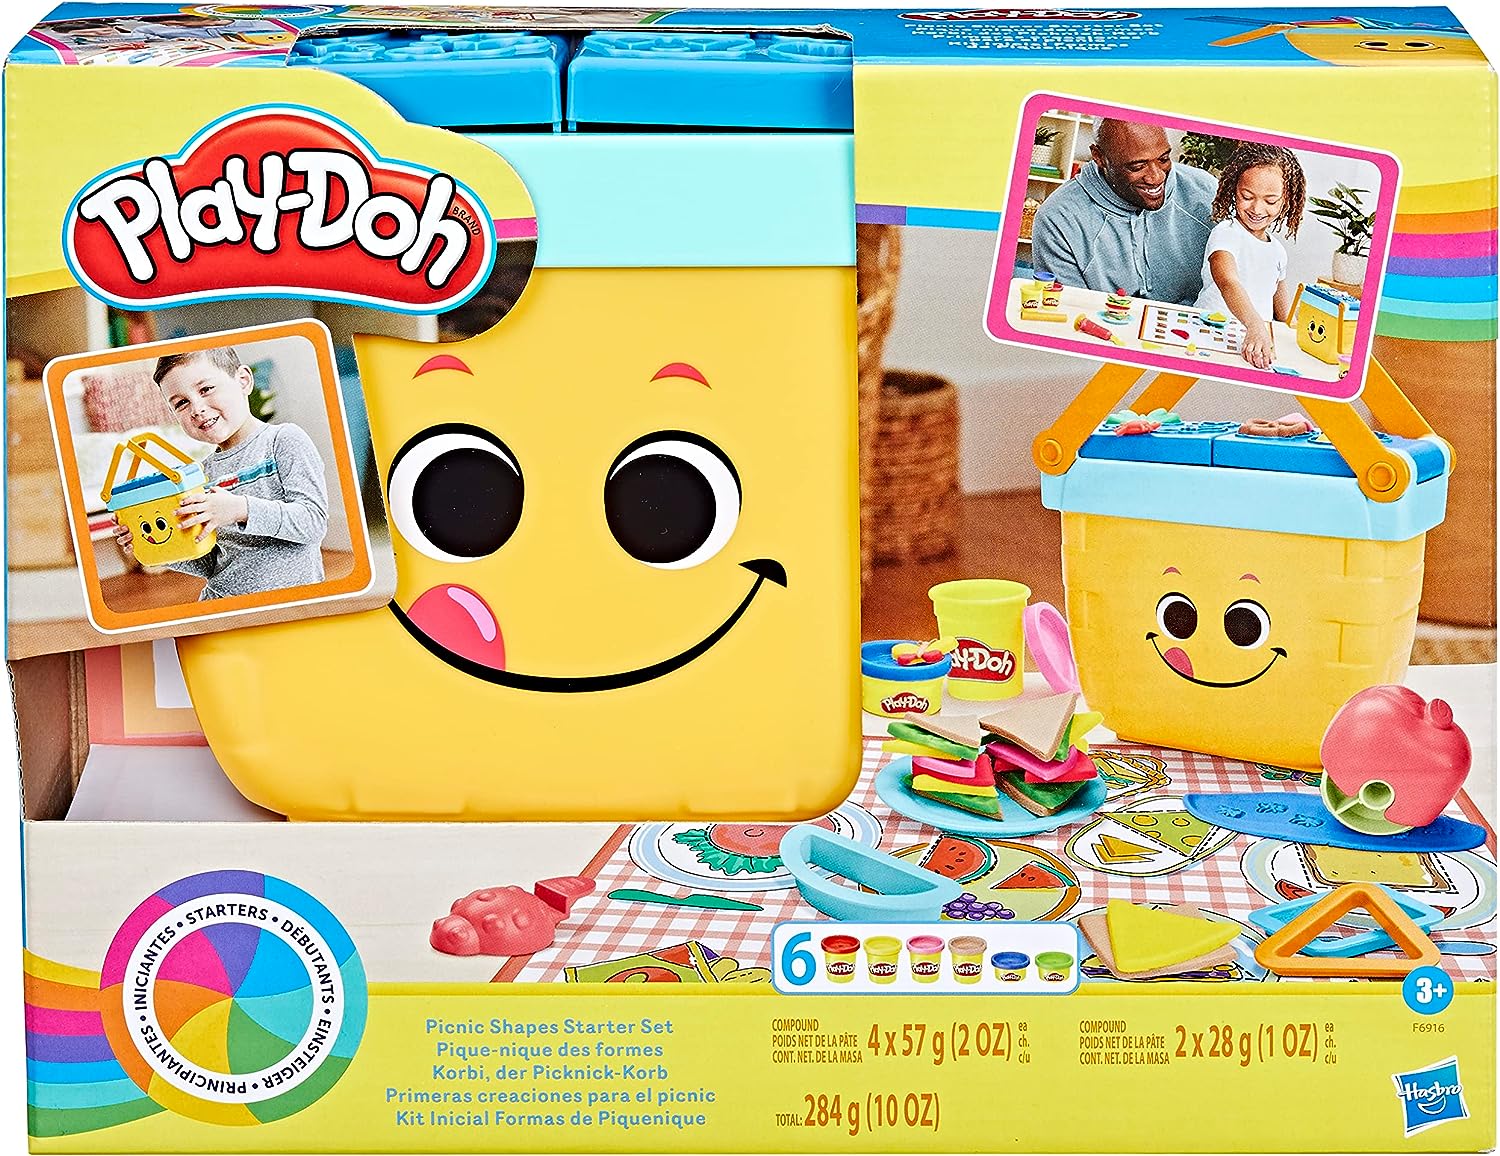 Play-Doh Picnic Shapes Starter Set, Preschool Toys (F6916) for 3+ Years, New